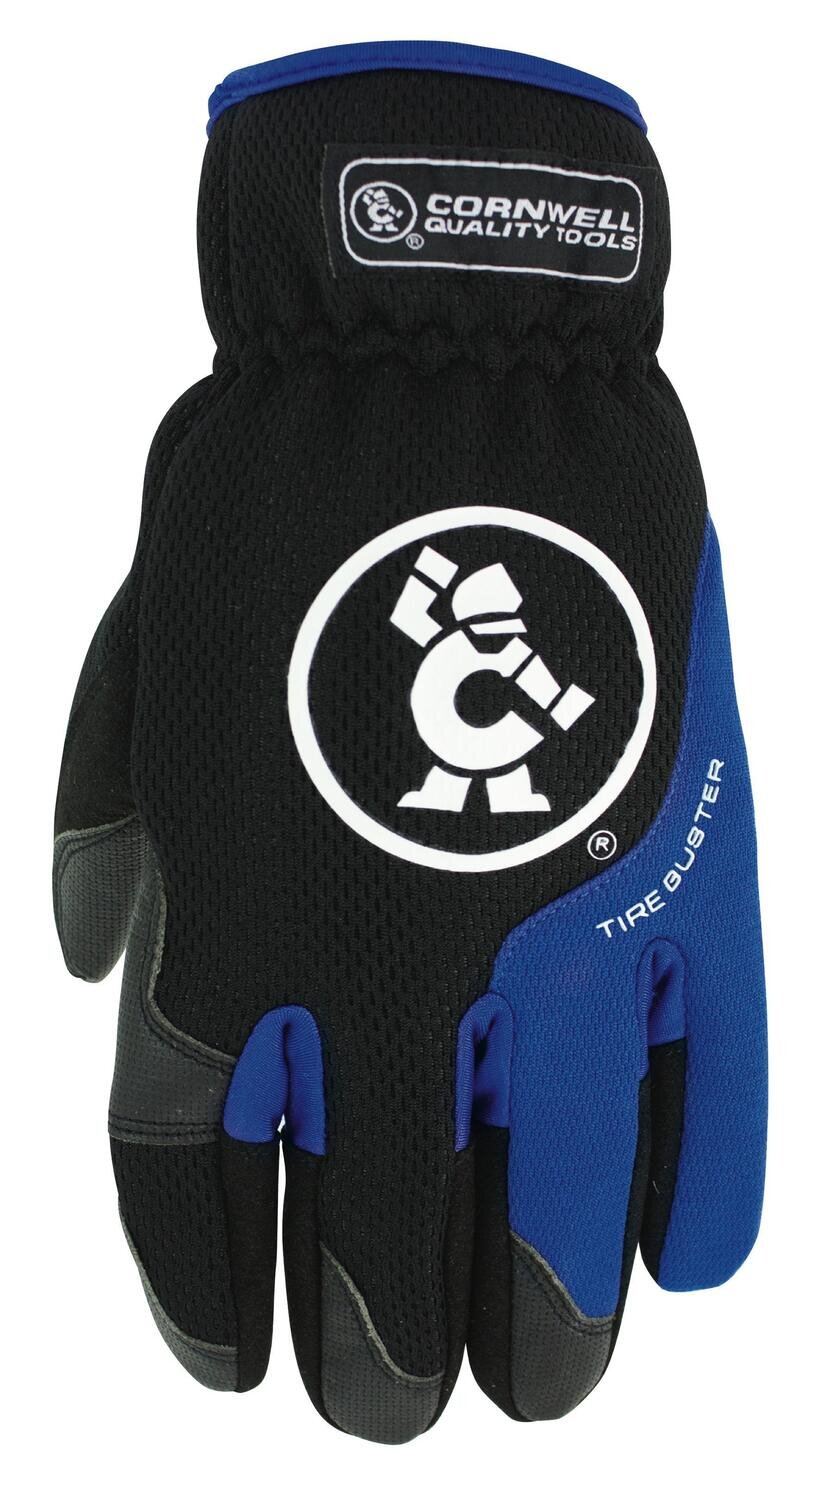 ASCCTBM - Tire Buster Gloves, M